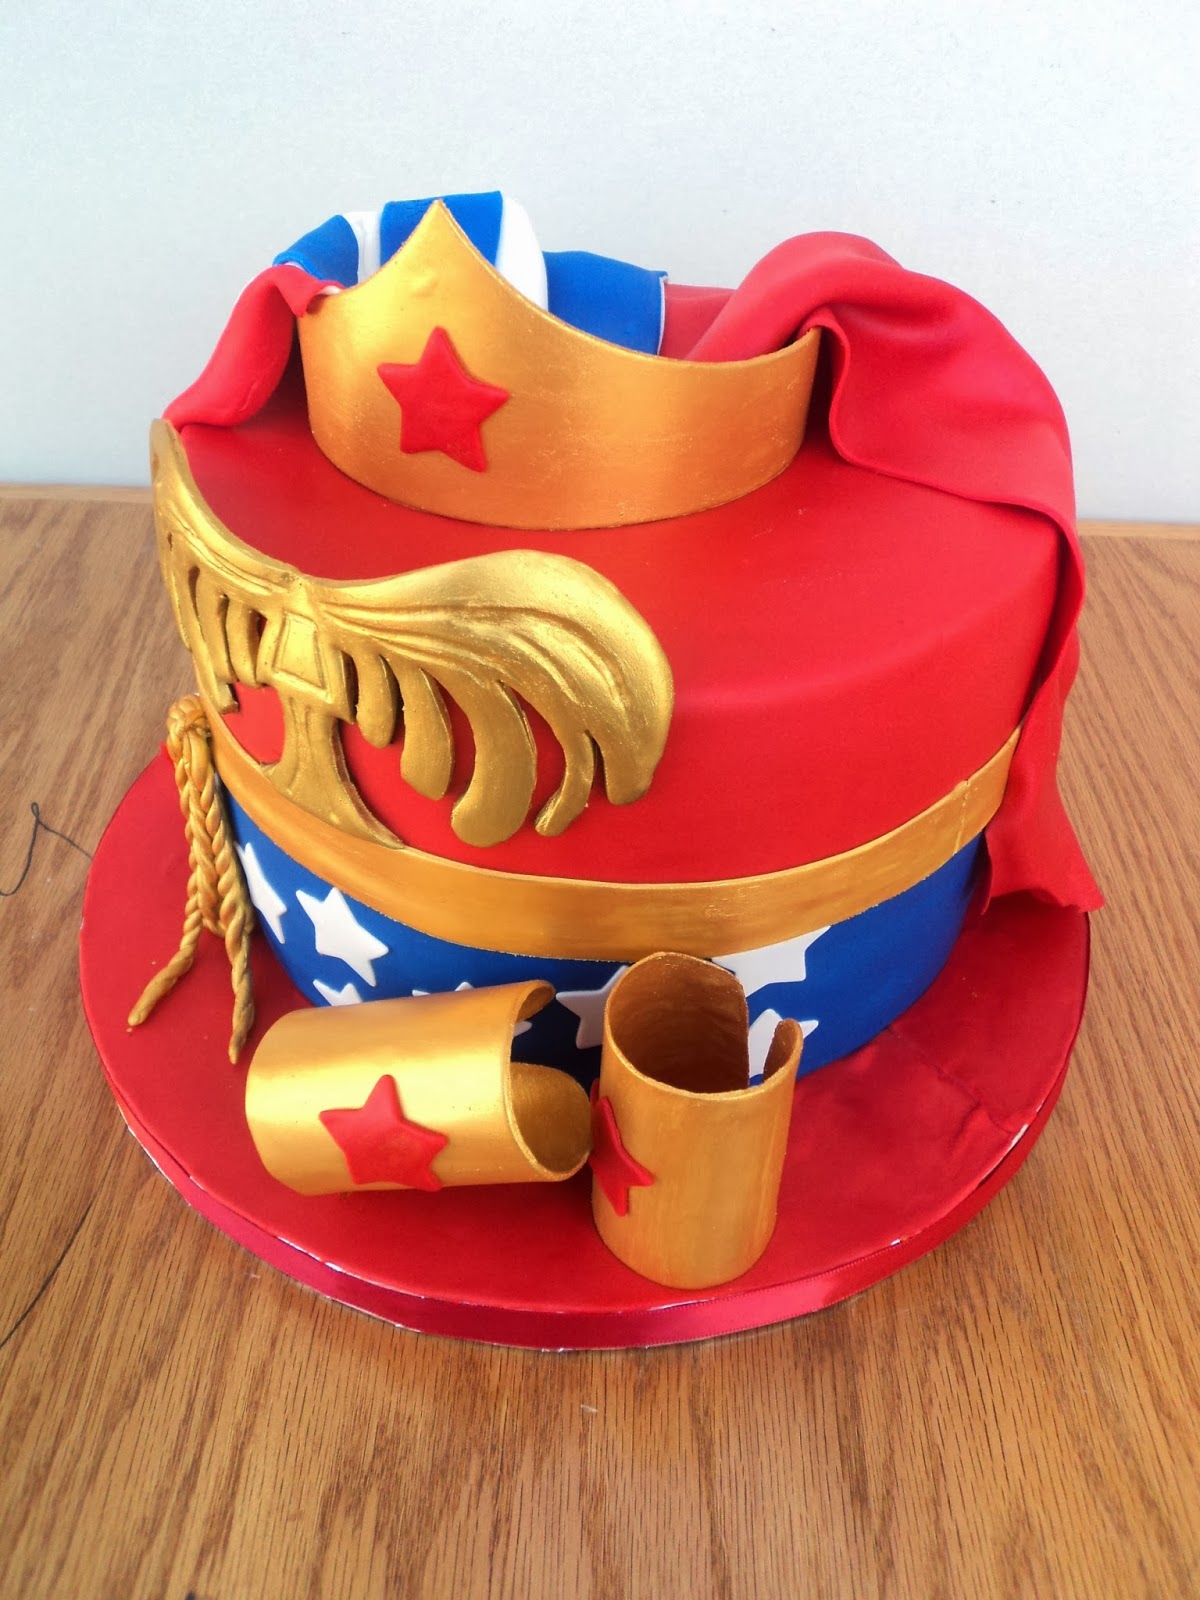 Delectable Cakes: Wonder Woman with Cape Birthday Cake